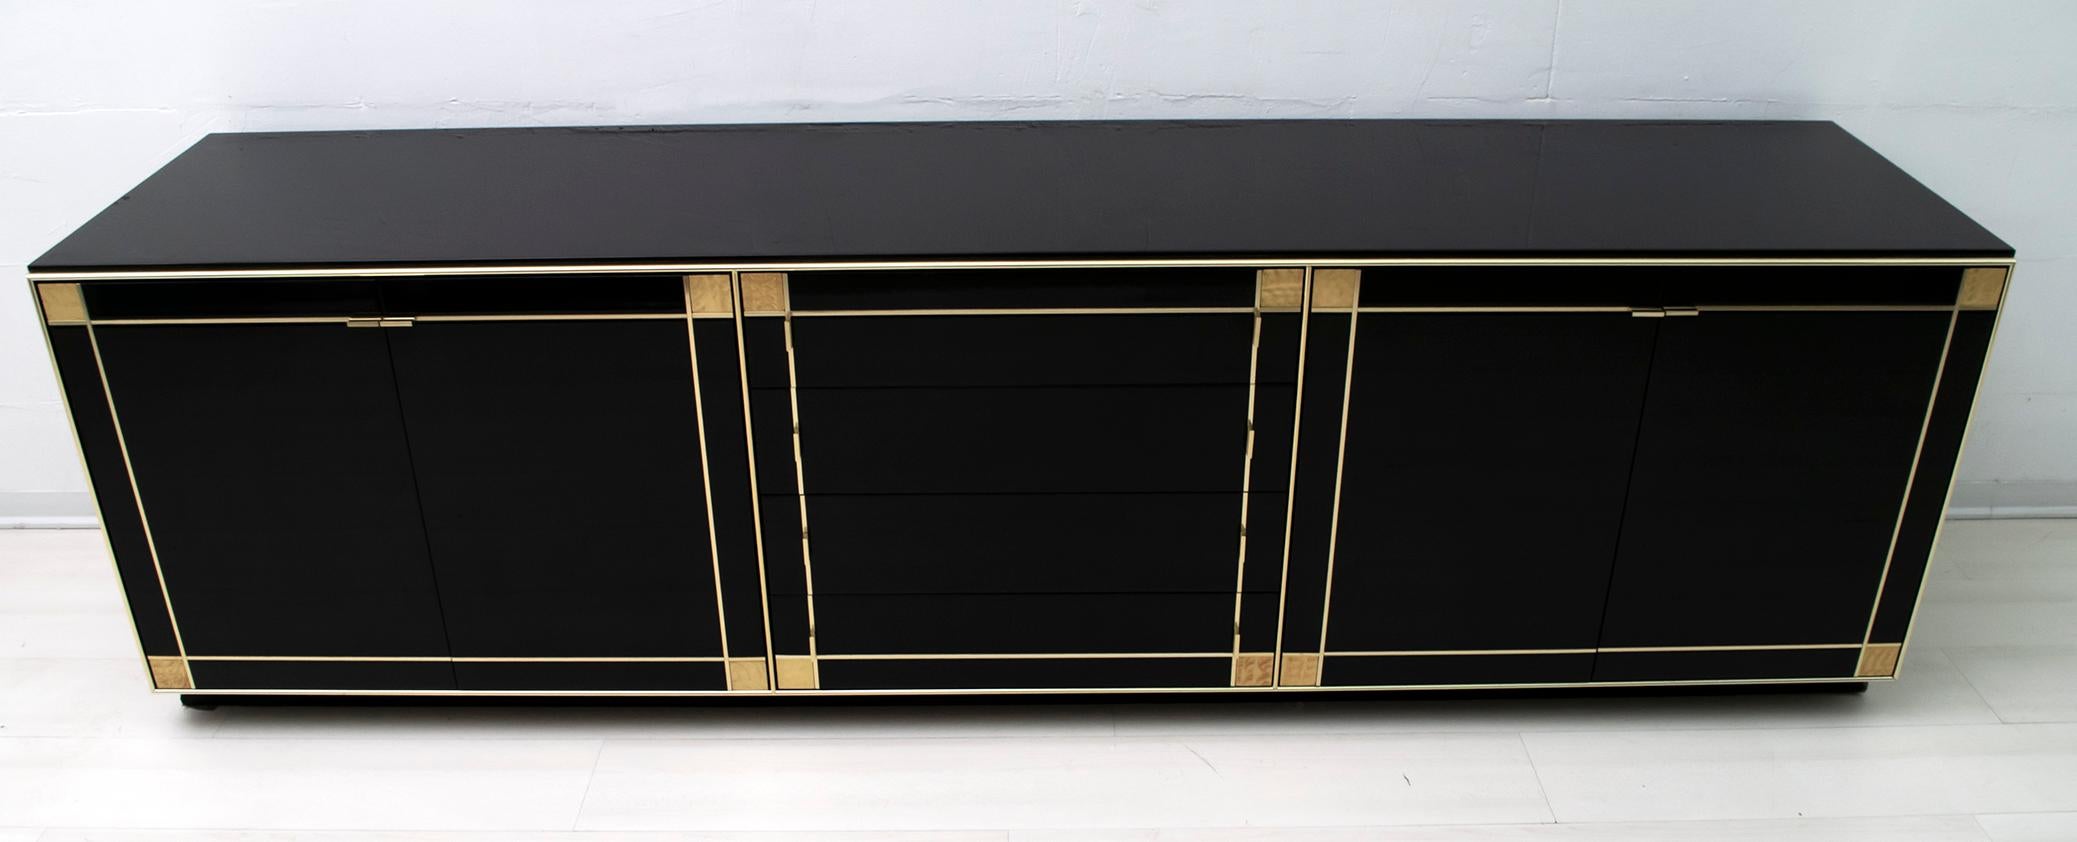 Hollywood Regency sideboard in the style of Maison Jansen, designed by the French designer Pierre Cardin in the 1980s.

This large sideboard with four cabinets and four large drawers offers plenty of space. The front of the wardrobe is finished